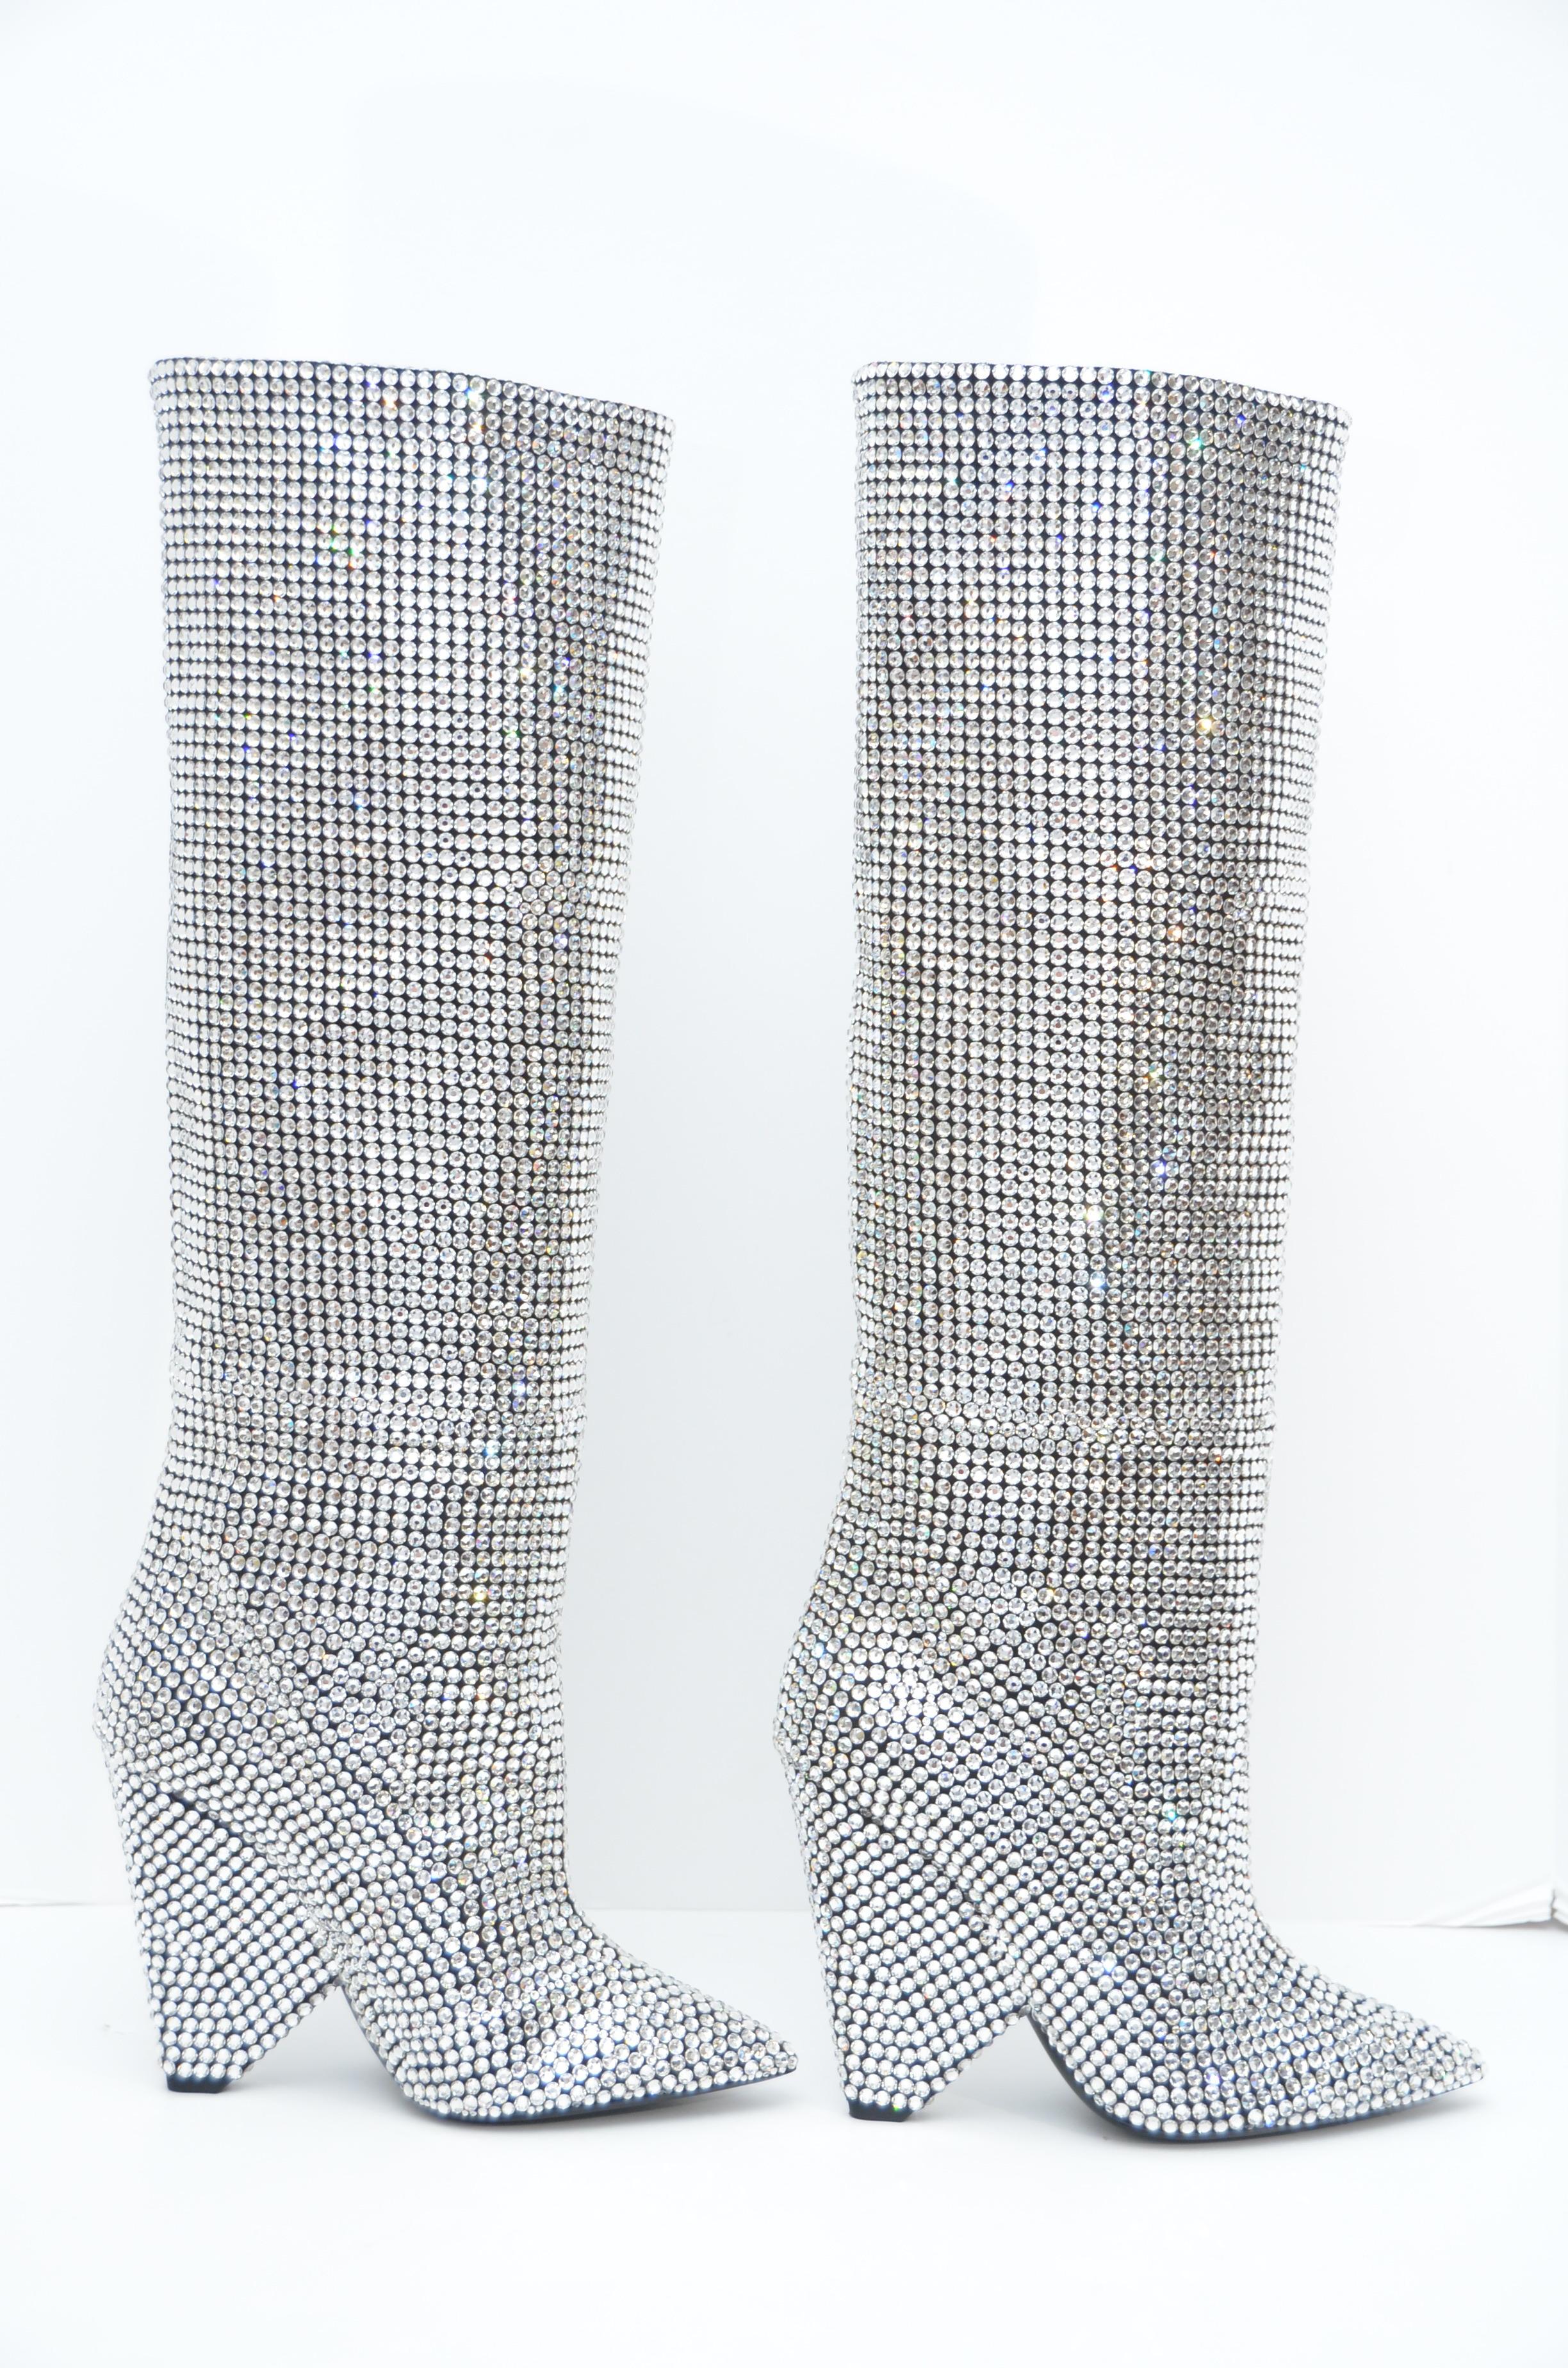 Women's or Men's Saint Laurent Niki Crystals Embellished  Boots Retailed $10, 000  NEW W Box  39